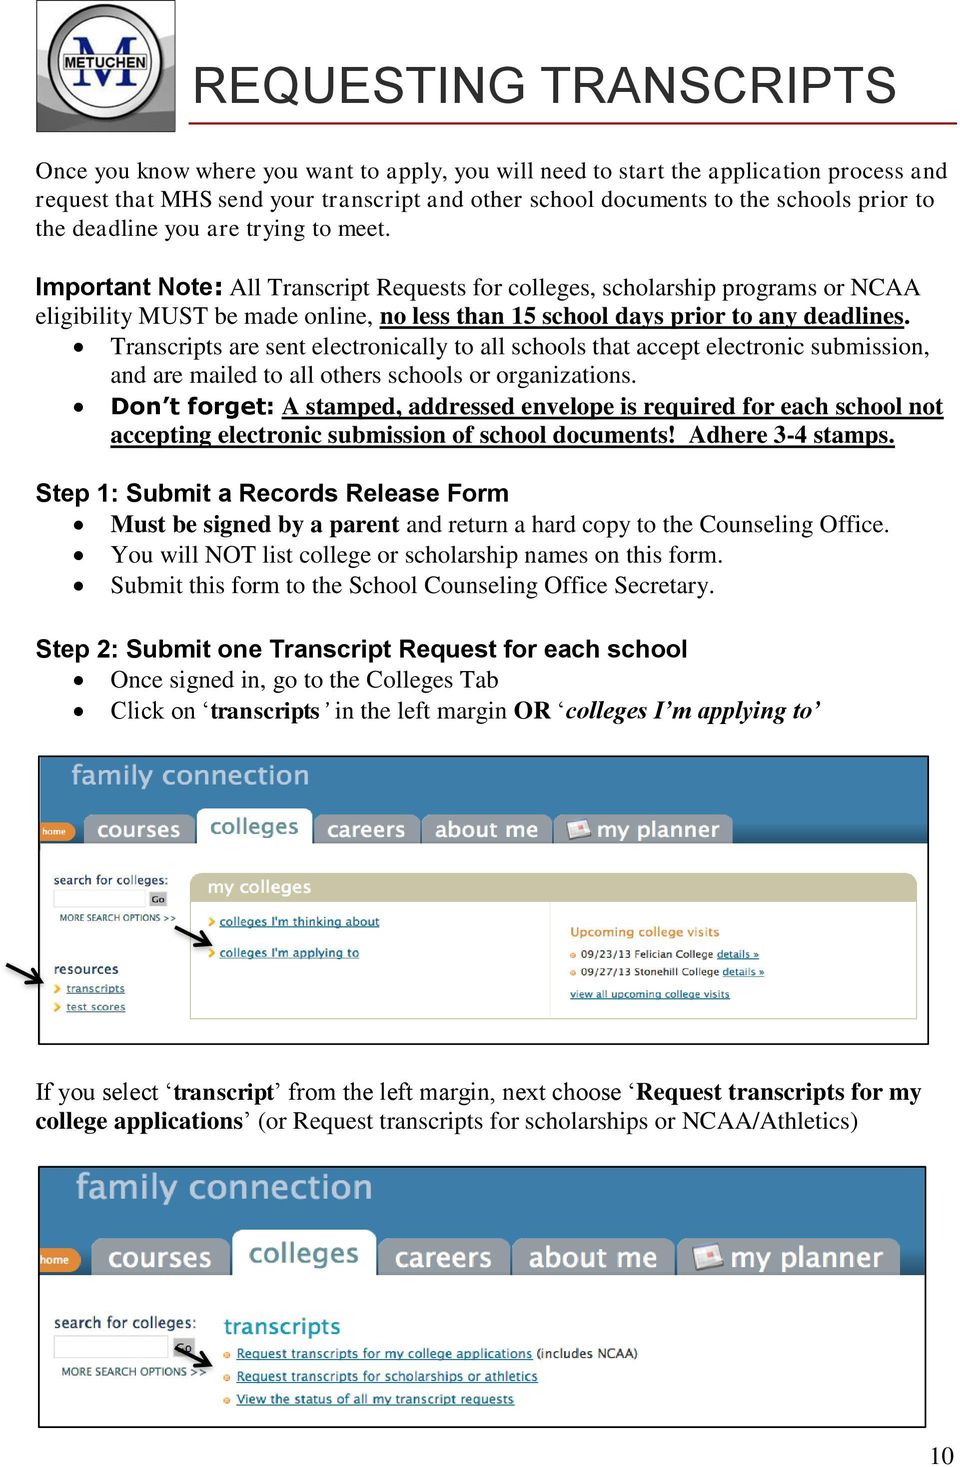 Important Note: All Transcript Requests for colleges, scholarship programs or NCAA eligibility MUST be made online, no less than 15 school days prior to any deadlines.